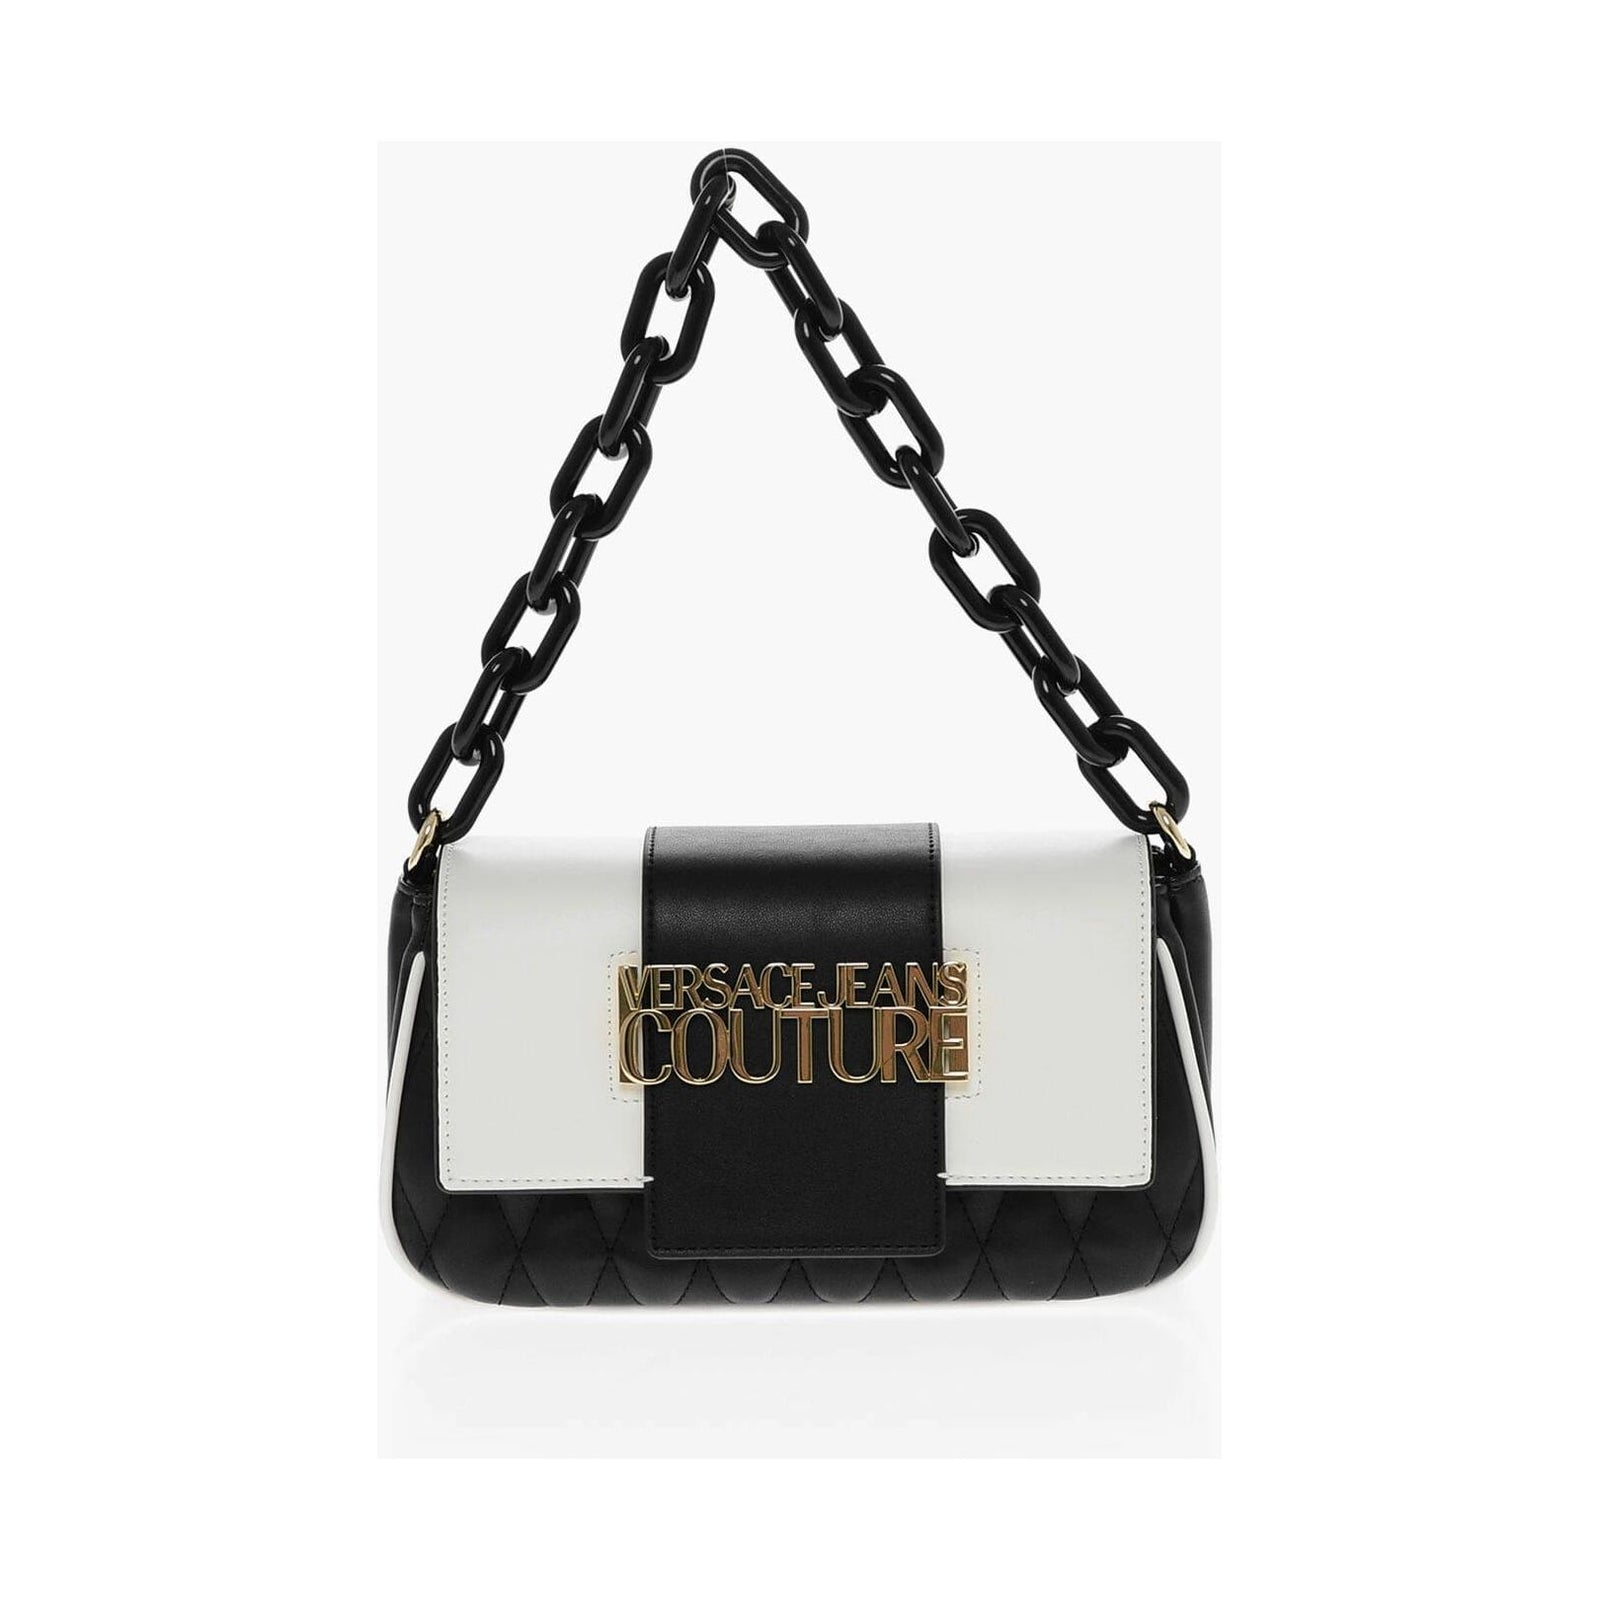 Handbags Versace Jeans Couture , Style code: 74va4bf2-zs413-302